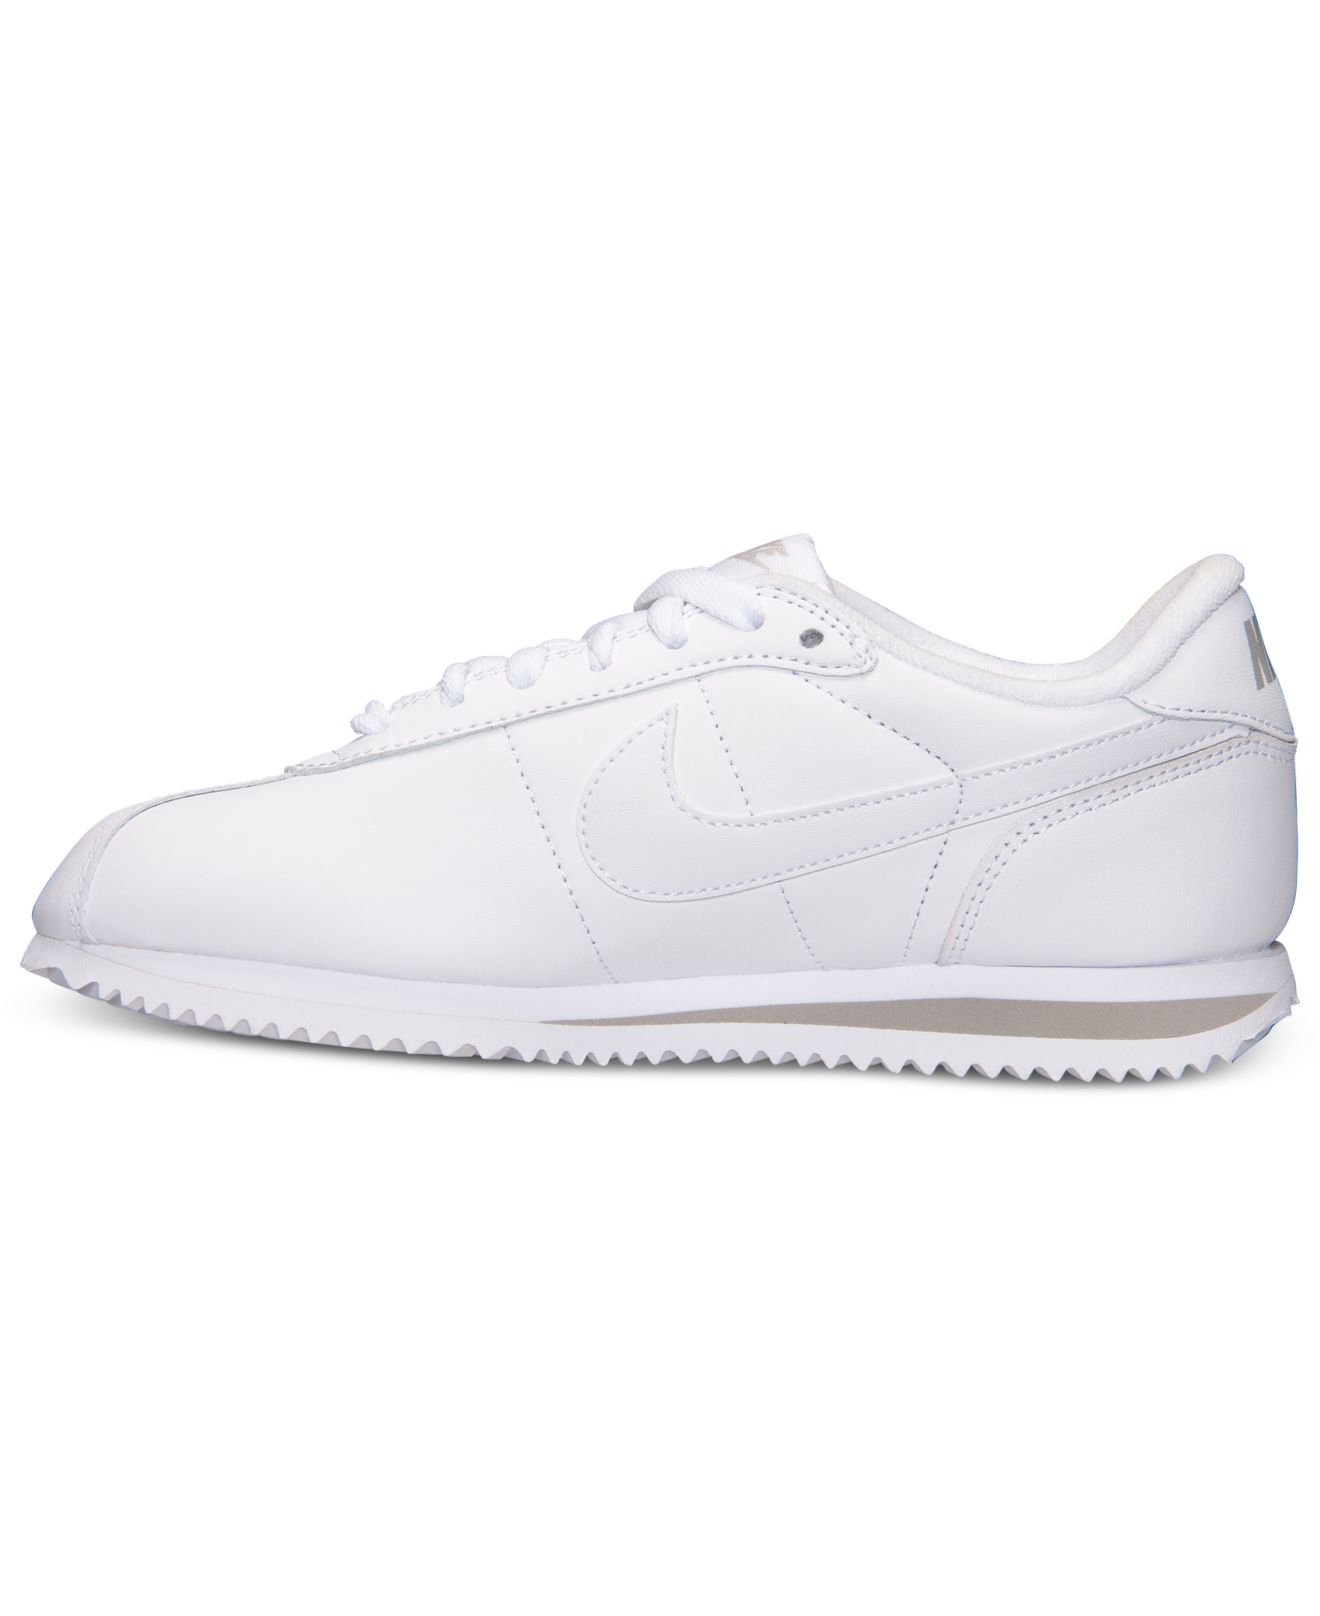 Nike Women's Cortez Basic Leather Casual Sneakers From Finish Line in ...